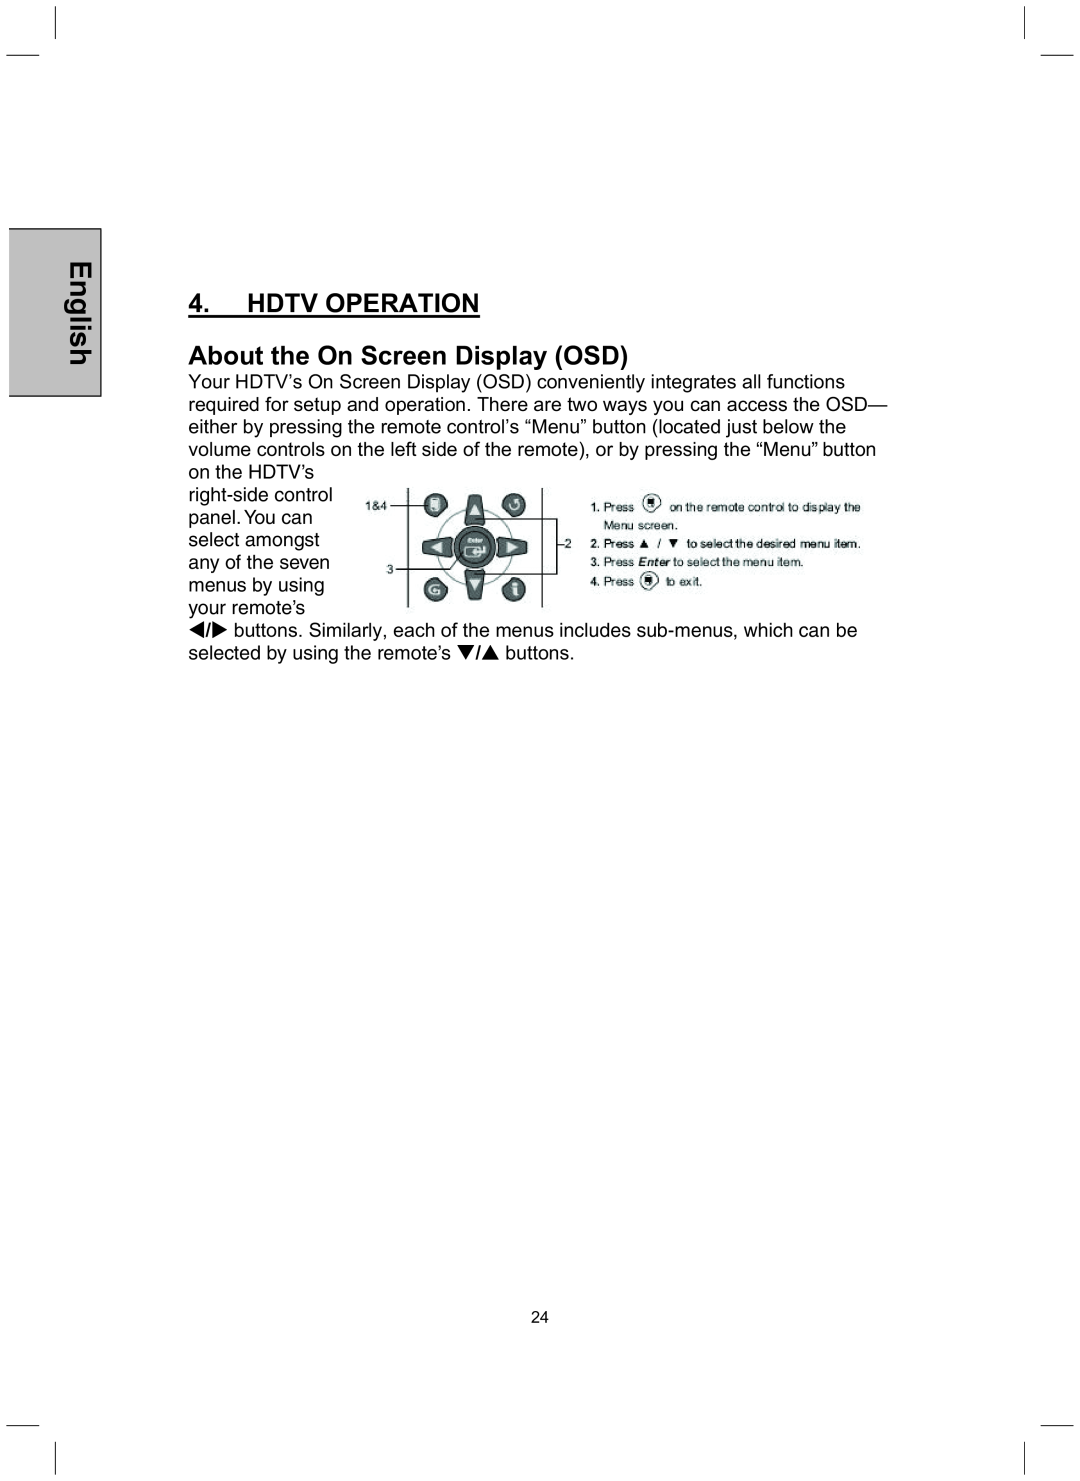 Westinghouse TX-52H480S user manual HDTV OPERATION About the On Screen Display OSD, English 